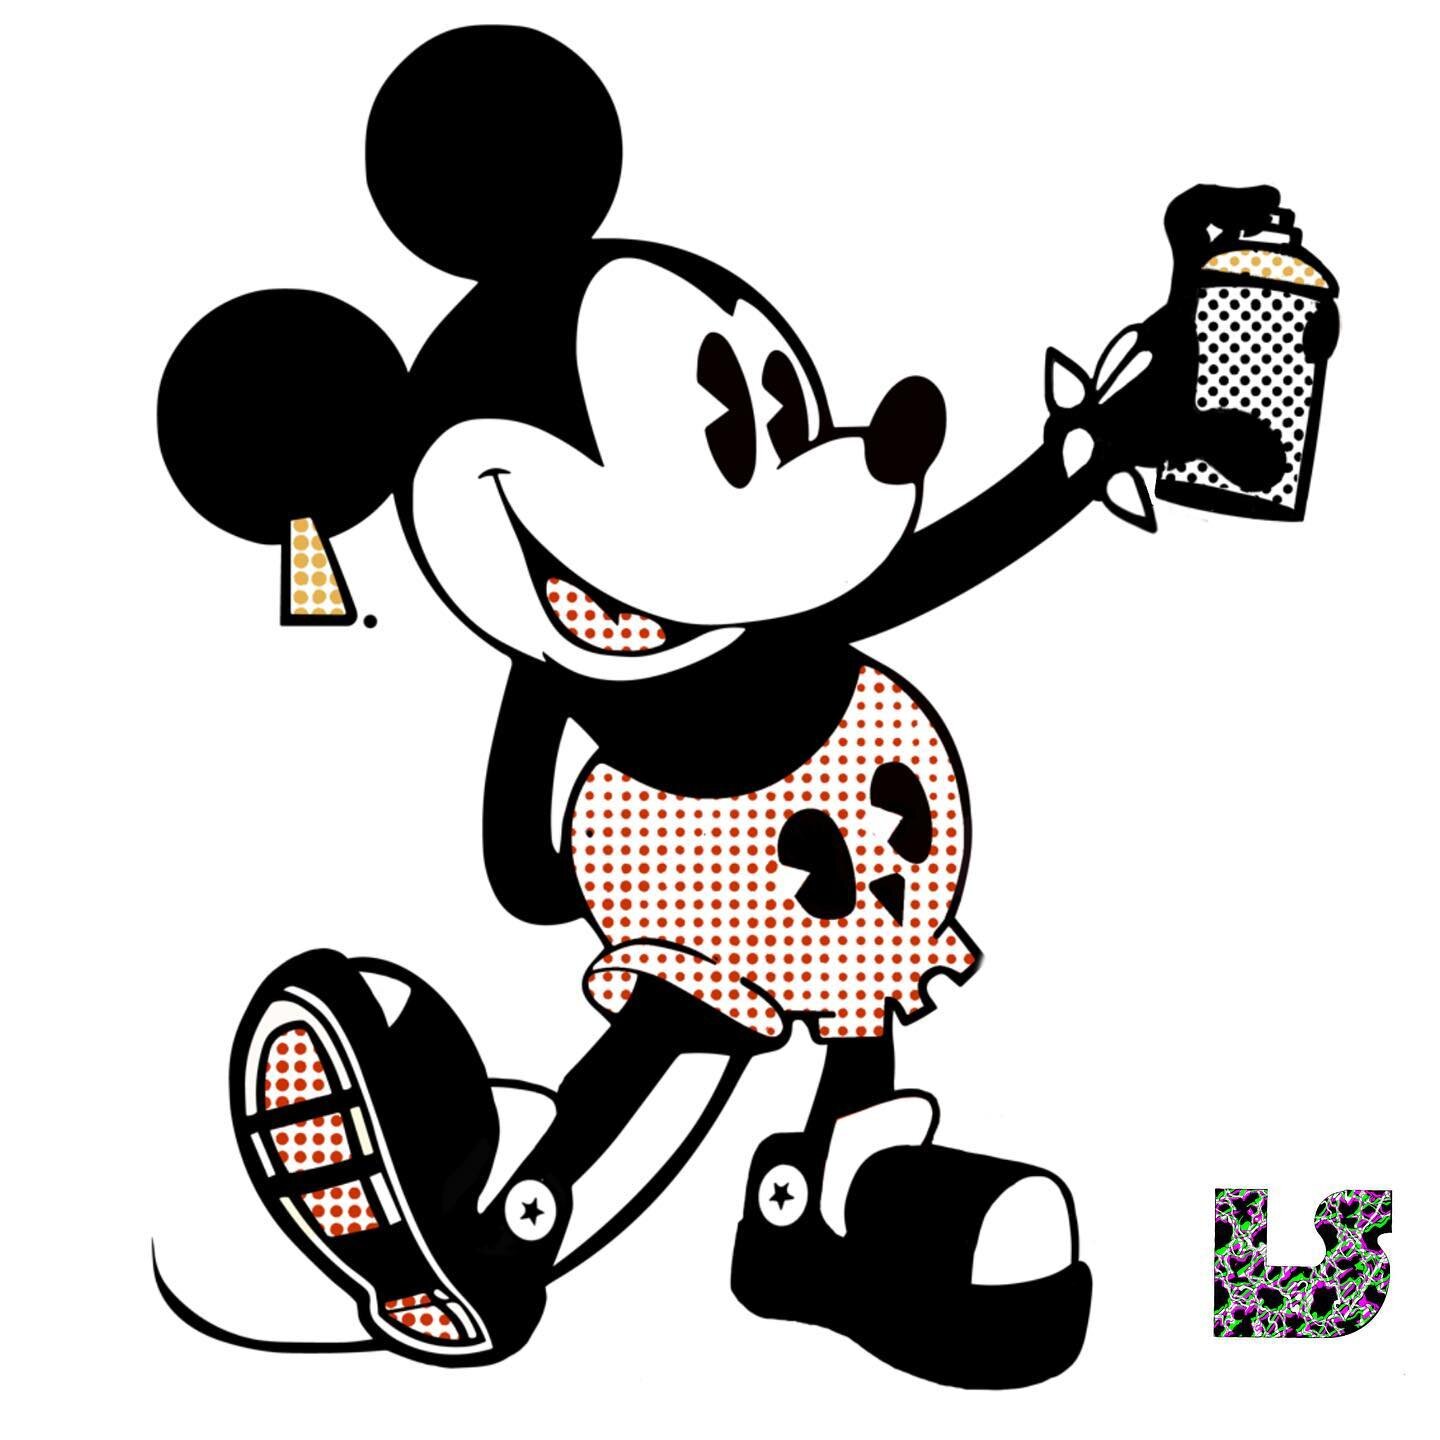 Halftone Punk Mickey - tattoo design. 

A small taster of the things to come for all of you once I am an established tattoo artist. Won&rsquo;t be doing this one any time soon I&rsquo;m afraid ! :)

I will be releasing the glitch variations flash she